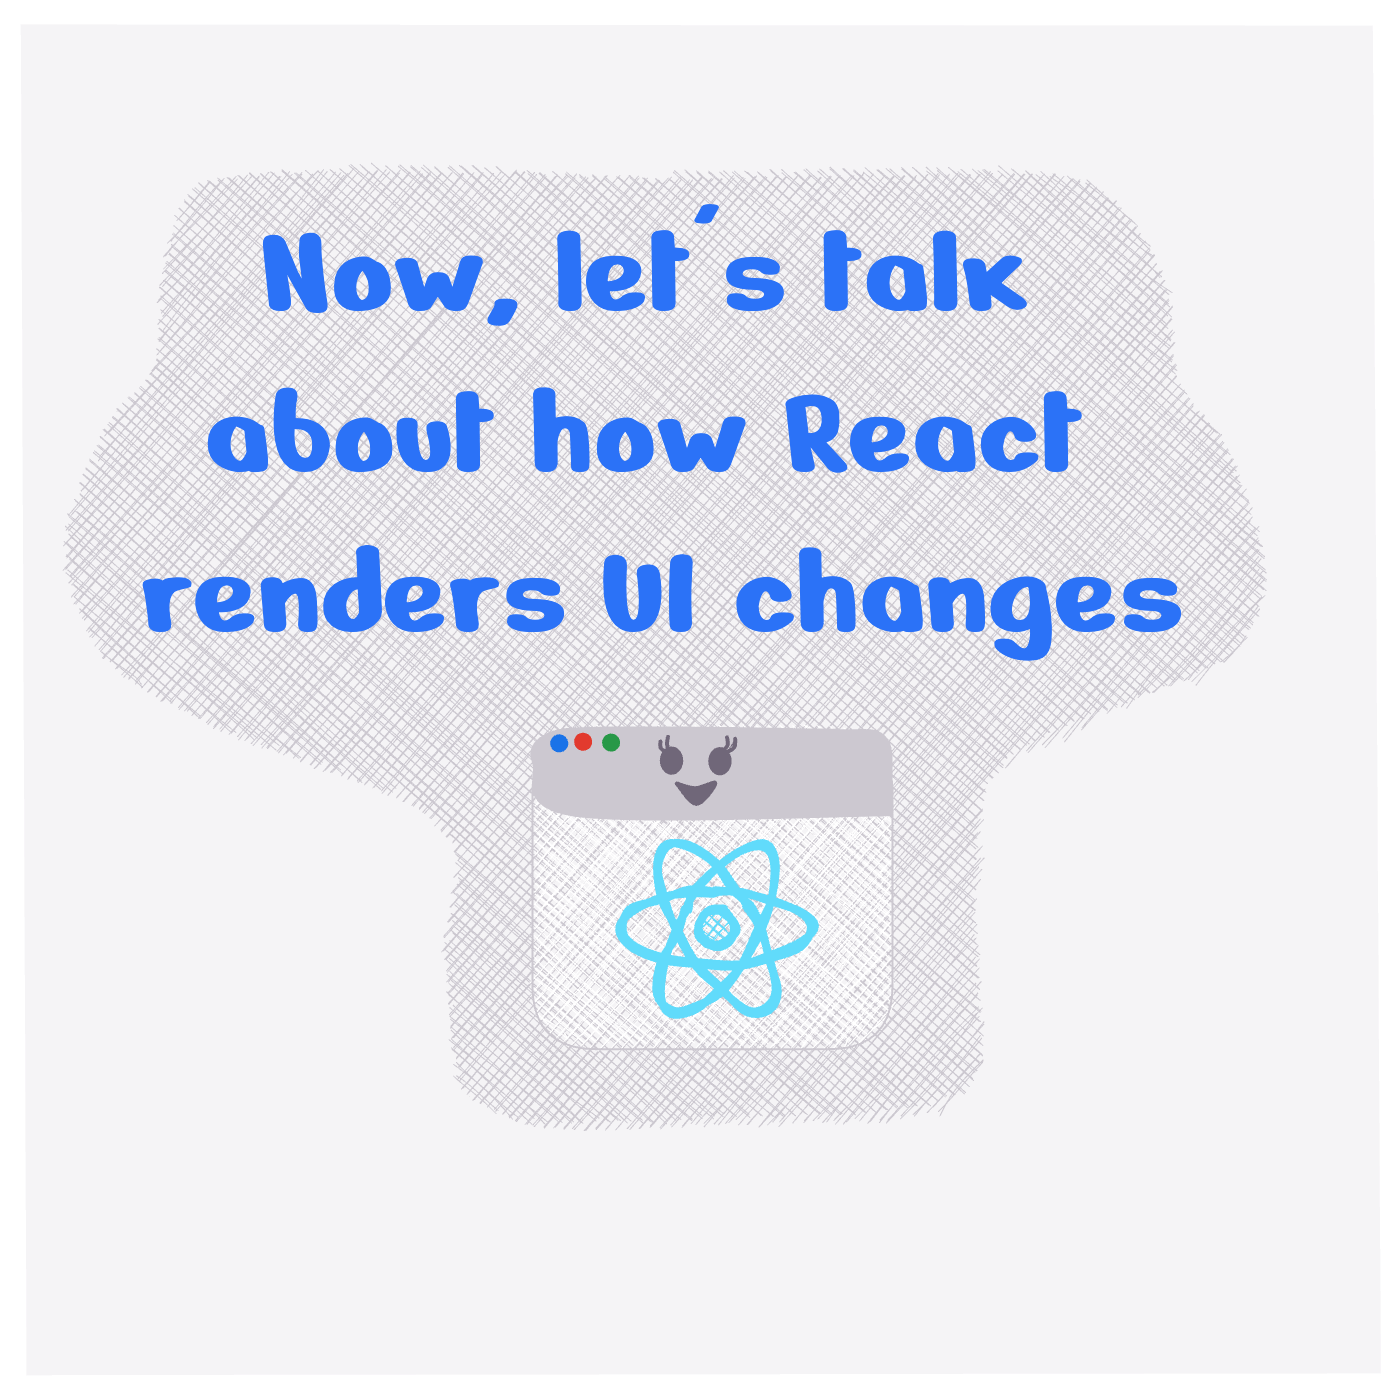 Now, let's talk about how React renders UI changes.